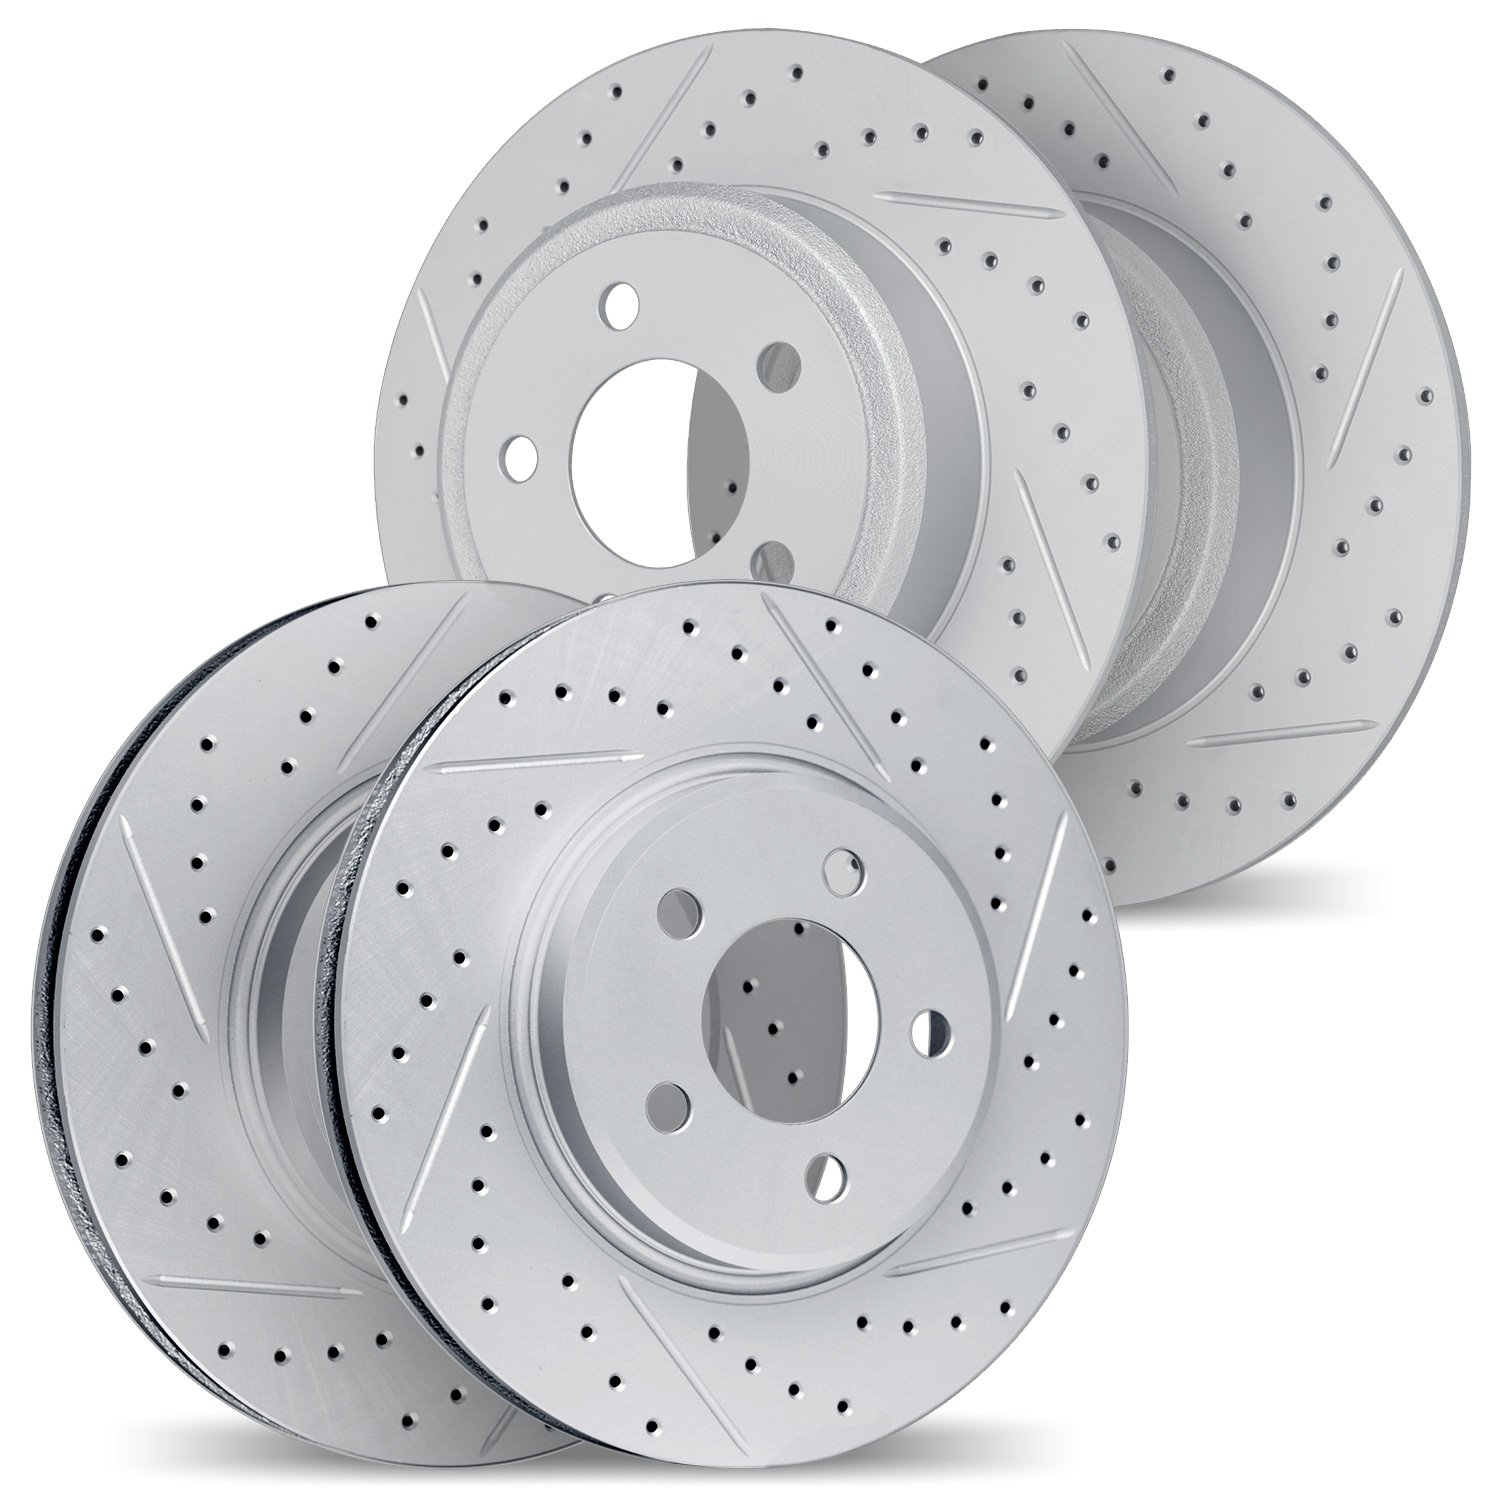 2004-72021 Geoperformance Drilled/Slotted Brake Rotors, 2004-2012 Mitsubishi, Position: Front and Rear